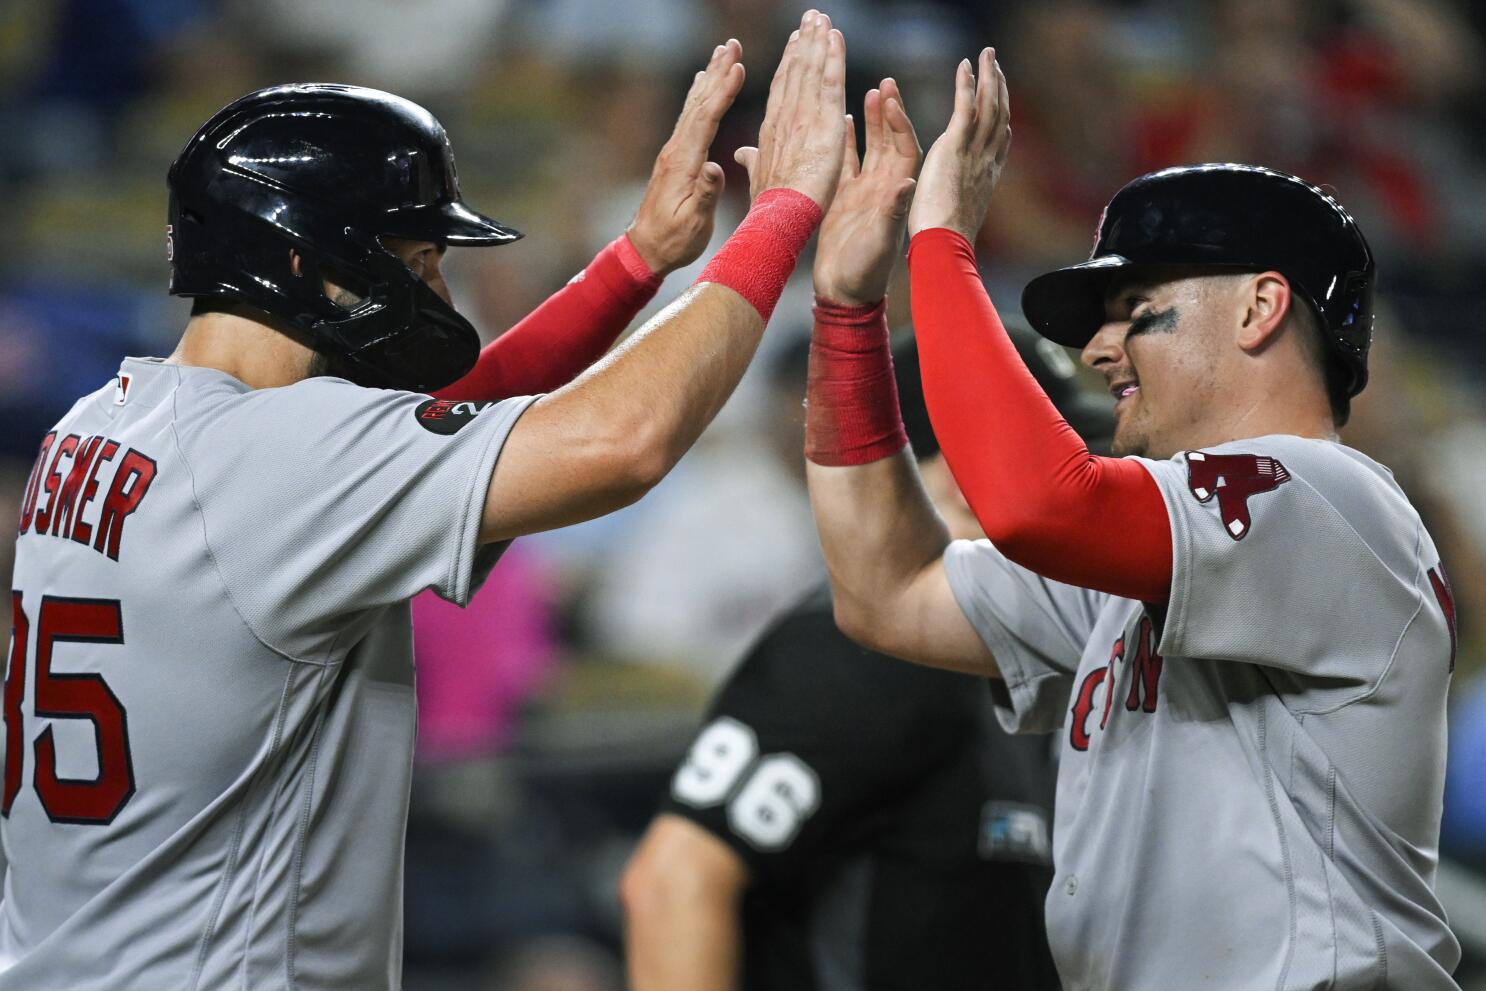 Bogaerts has 4 hits, Red Sox beat Royals 7-4 - The San Diego Union-Tribune